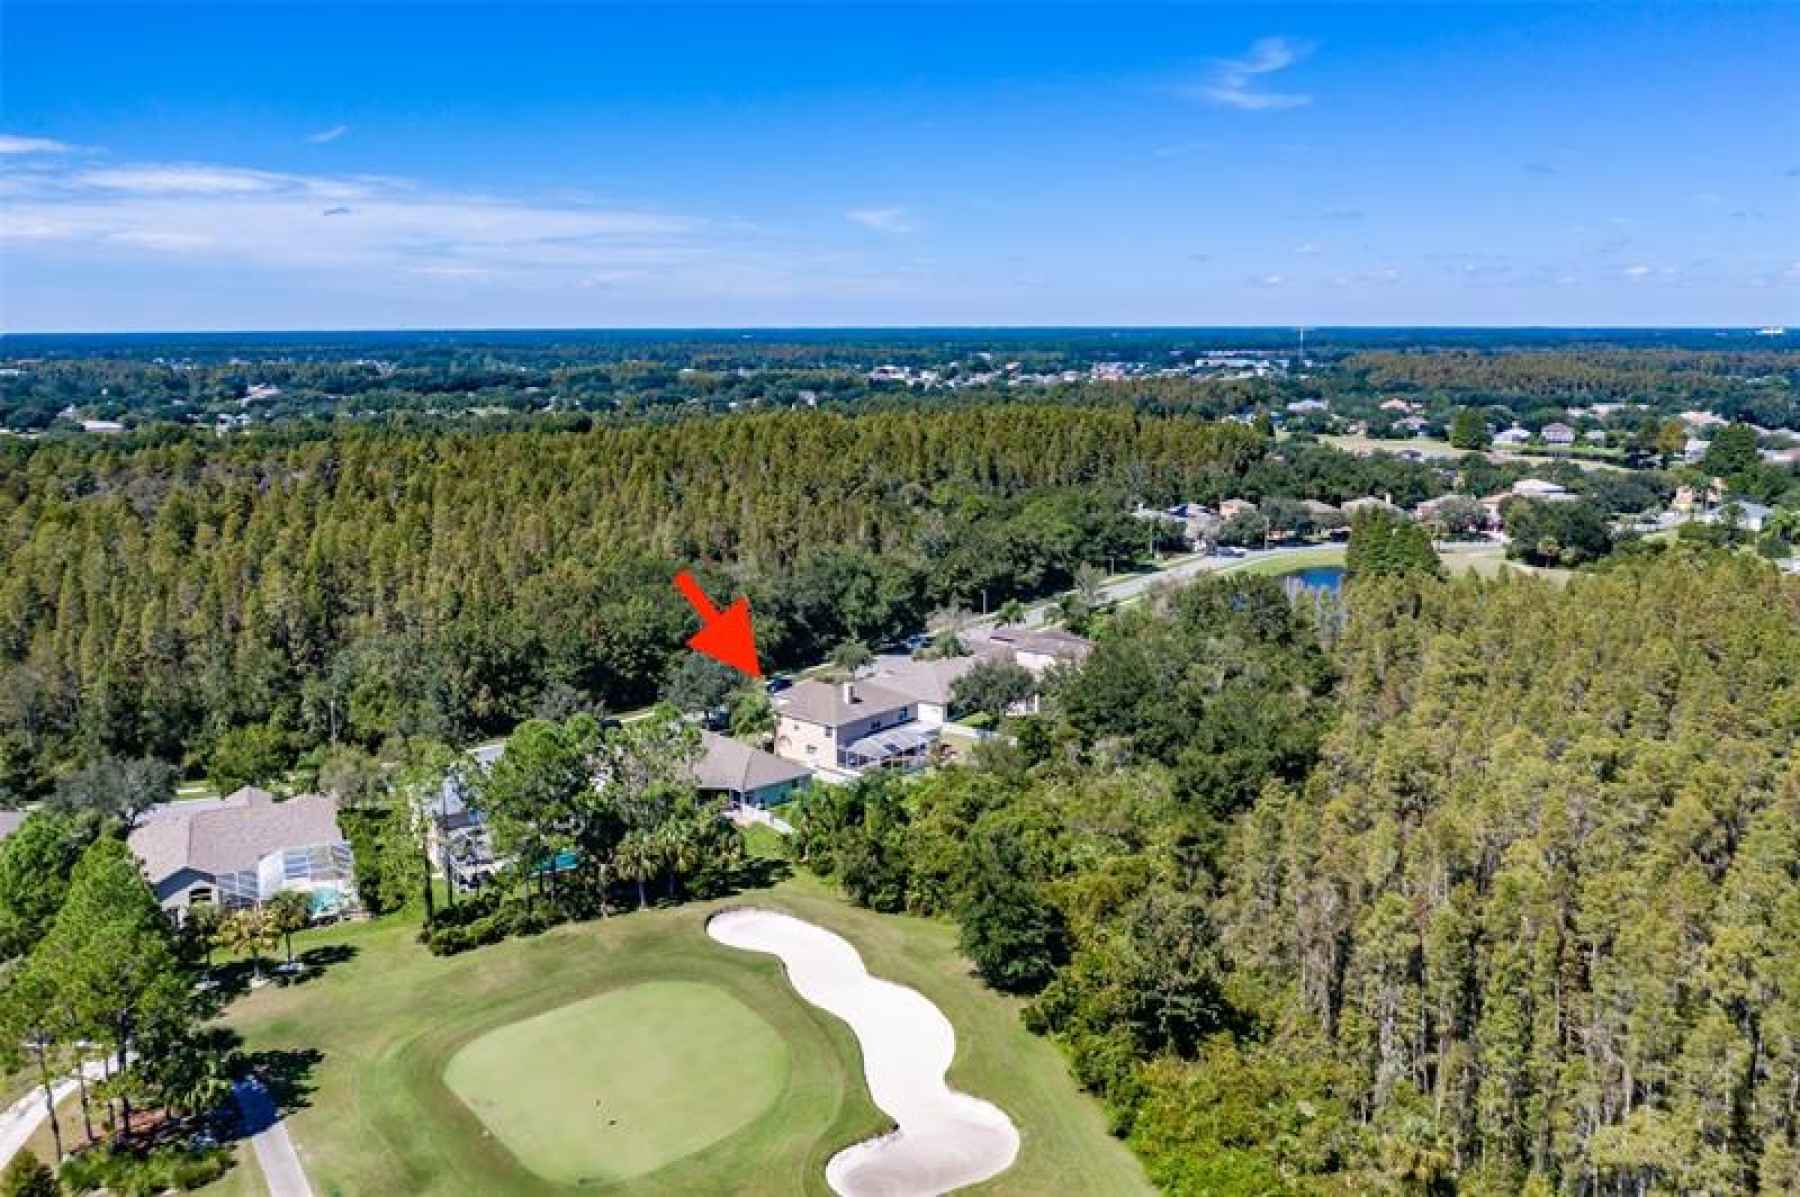 Home is located 1/2 mile from the golf course and clubhouse